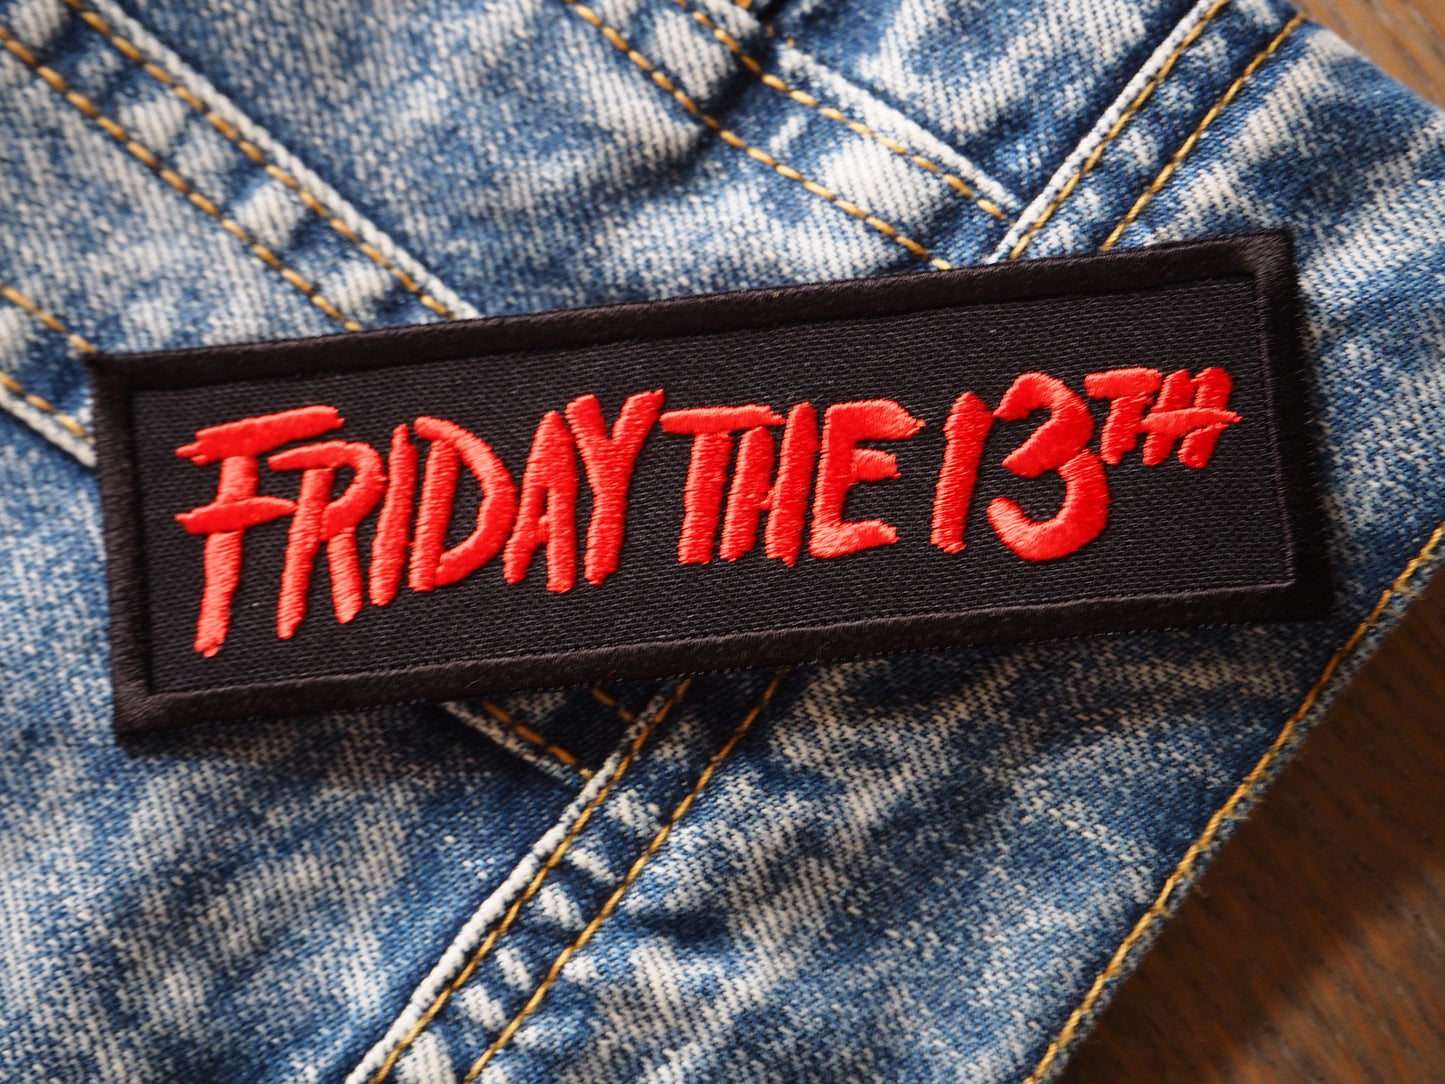 Friday The 13th Patch